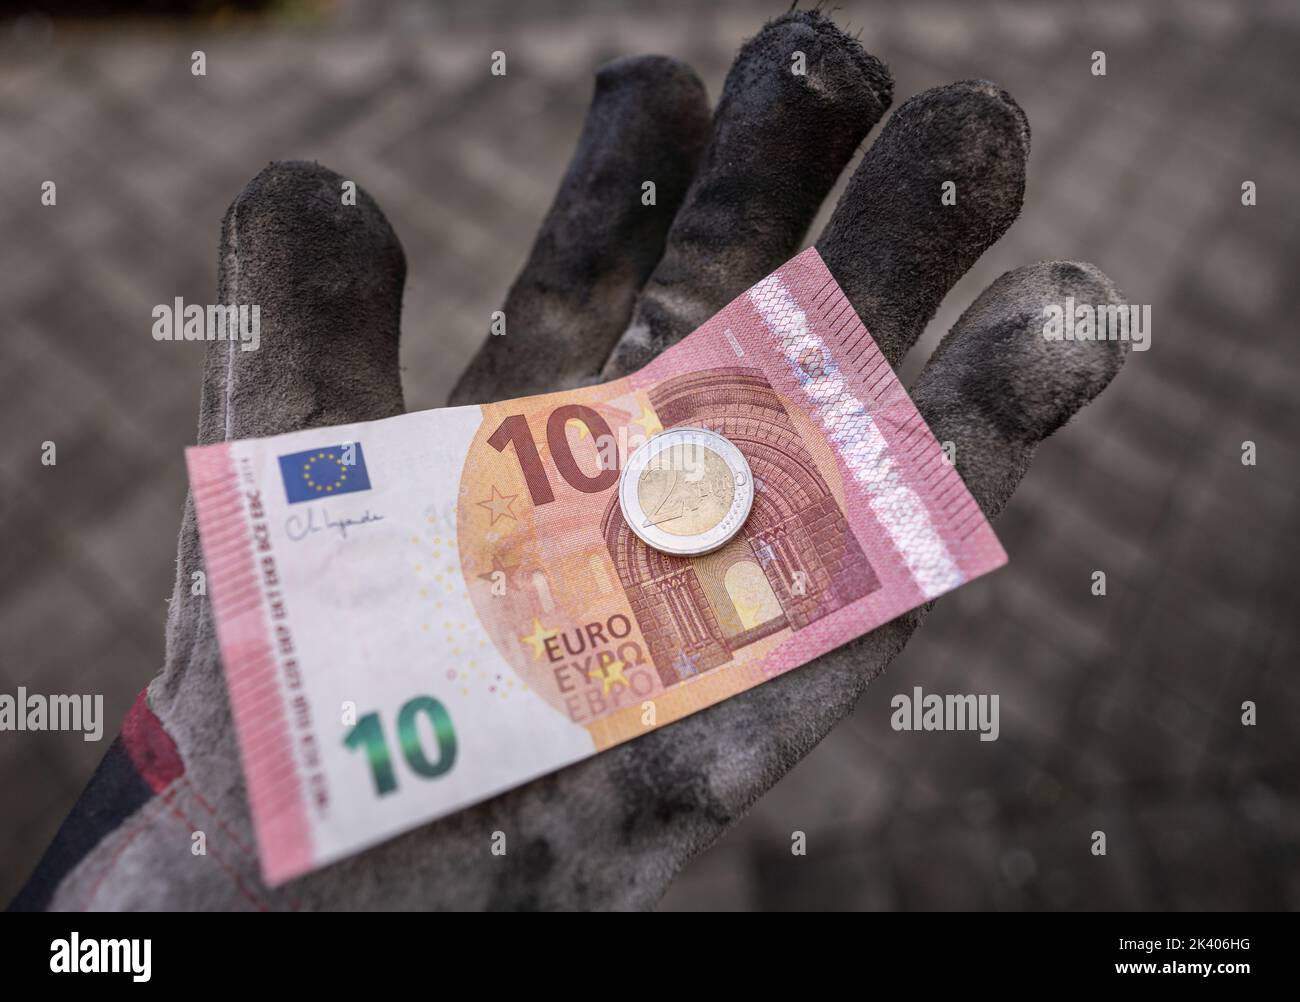 ILLUSTRATION - 28 September 2022, Hesse, Frankfurt/Main: A ten-euro bill and a two-euro coin lie in a work glove. On Oct. 1, 2022, the minimum wage in Germany will rise to twelve euros. According to a new study, 6.64 million people will then receive more money gross per hour worked. Photo: Frank Rumpenhorst/dpa Stock Photo